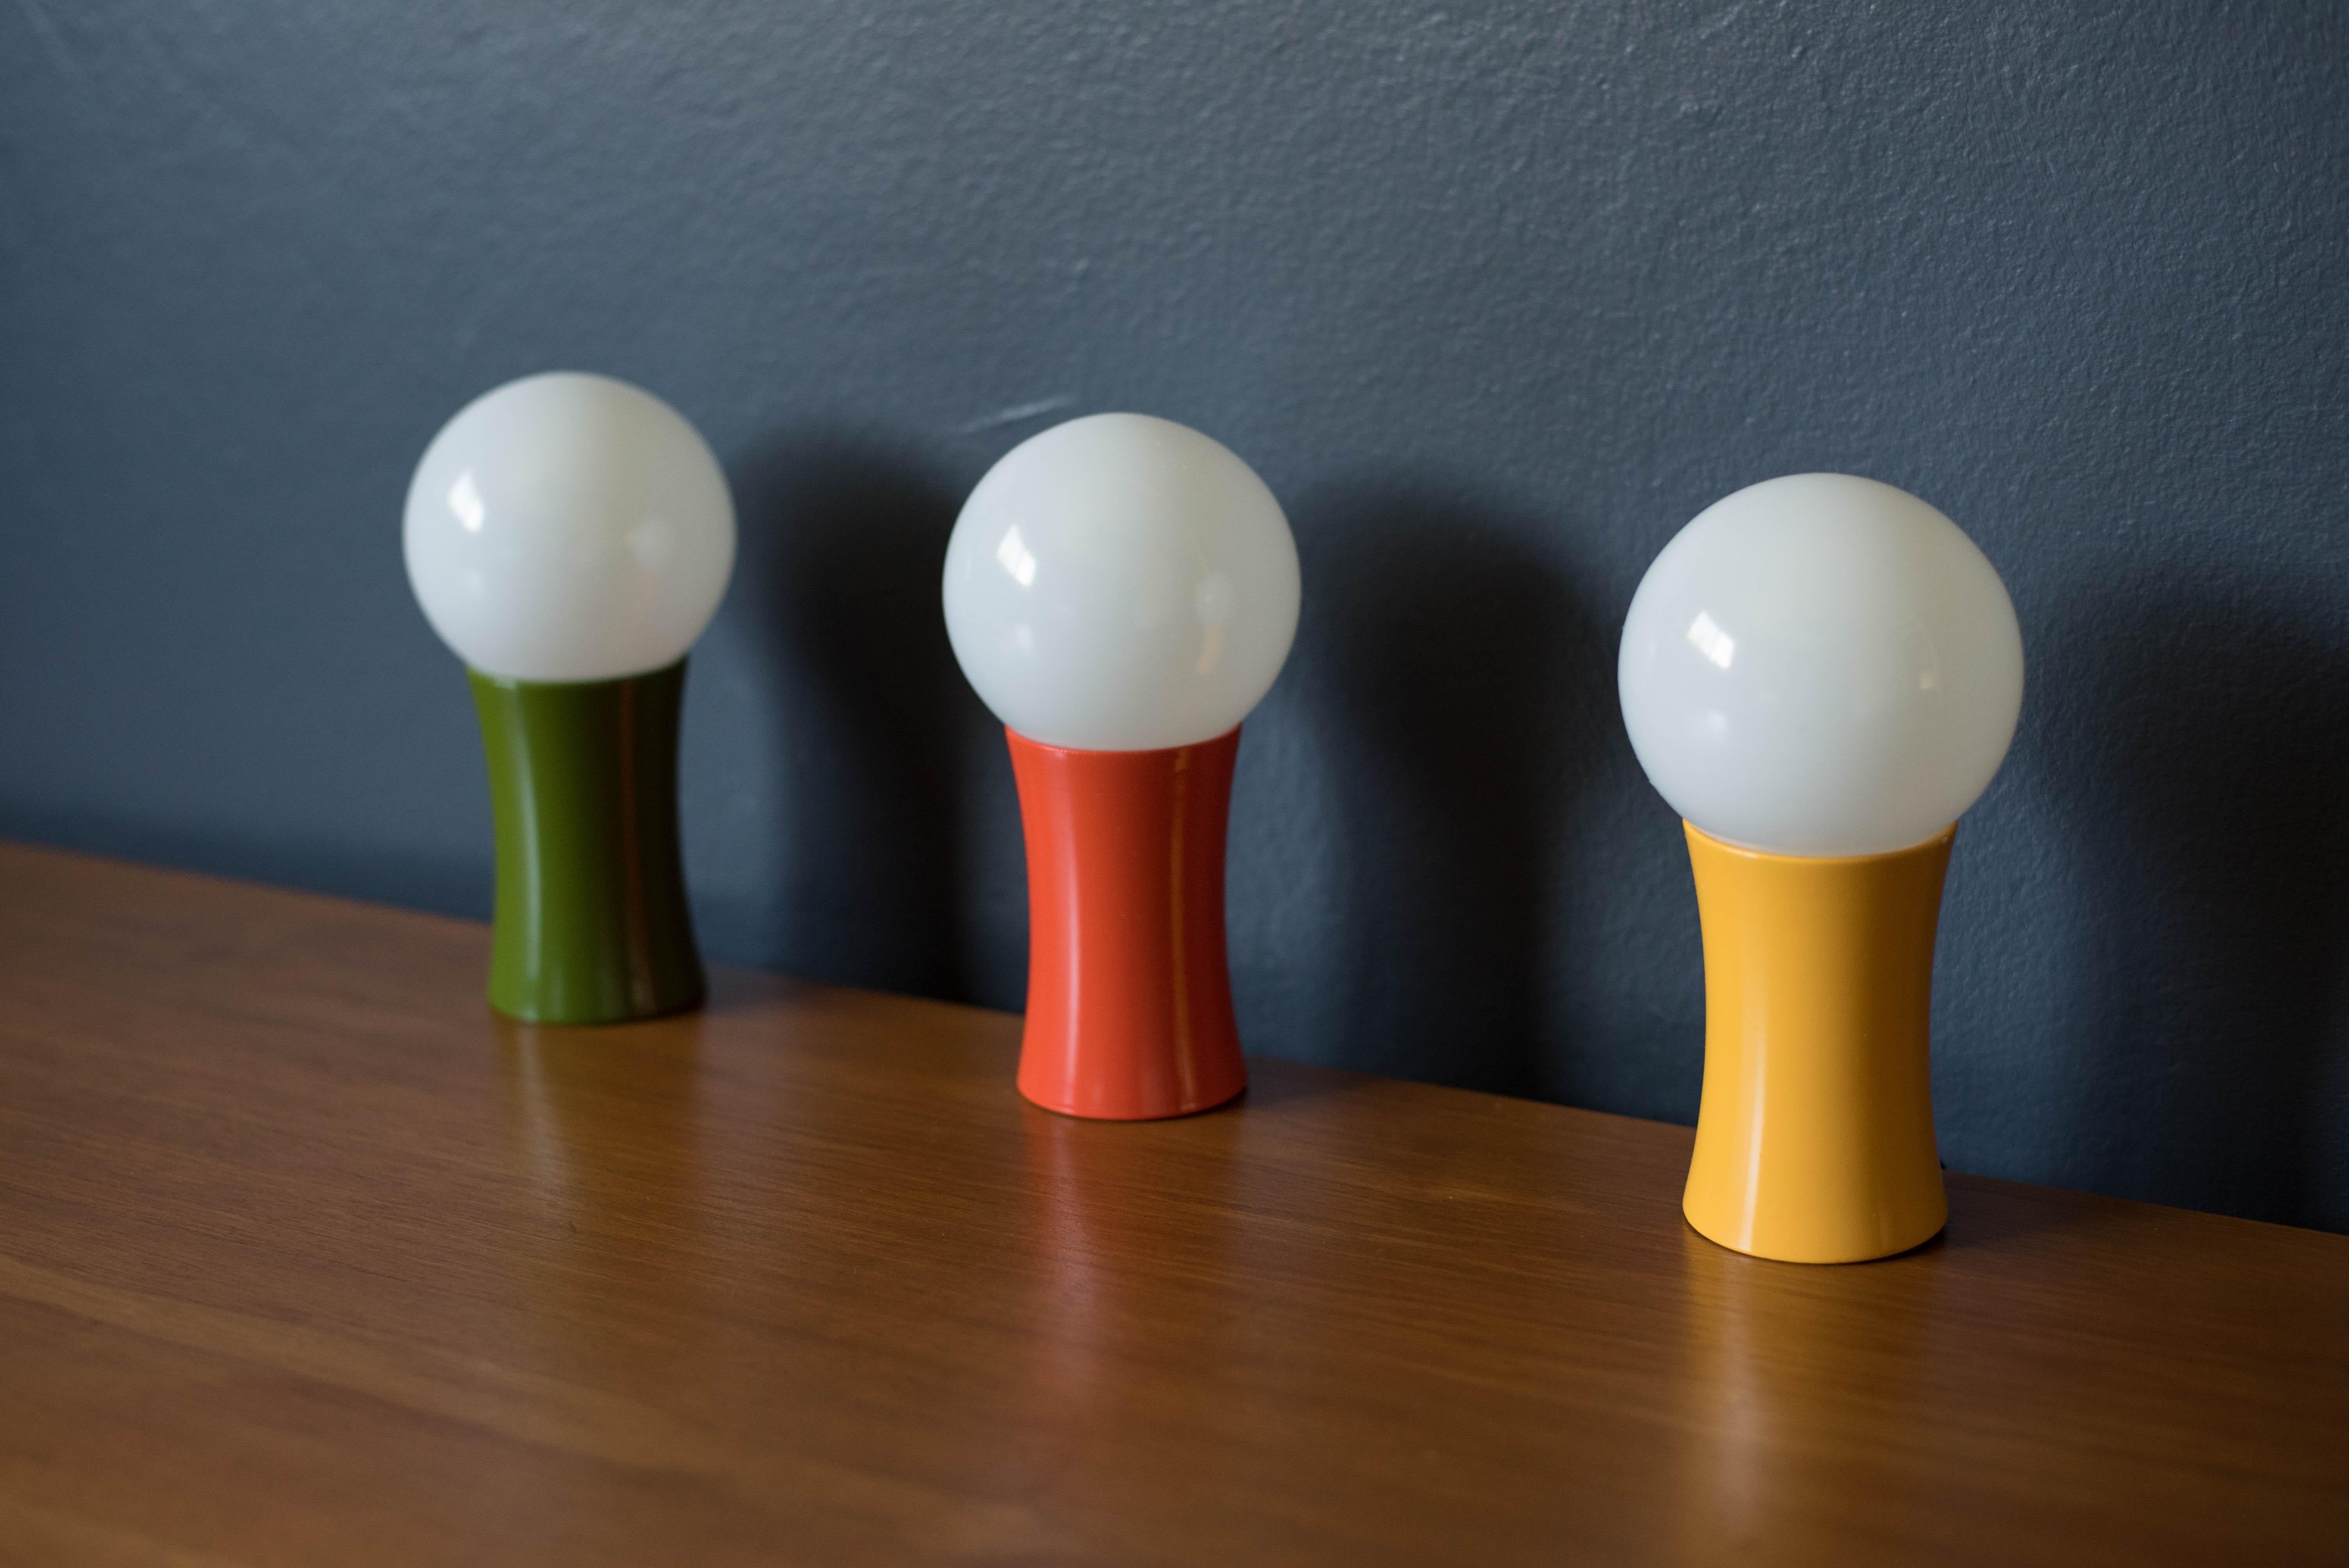 Vintage pop art accent lamps made in Japan and imported by Takahashi Trading Company in San Francisco. Includes the original bulb and package. Three different shades available in mod orange, green, and yellow. Price is for each.



Offered by Mid